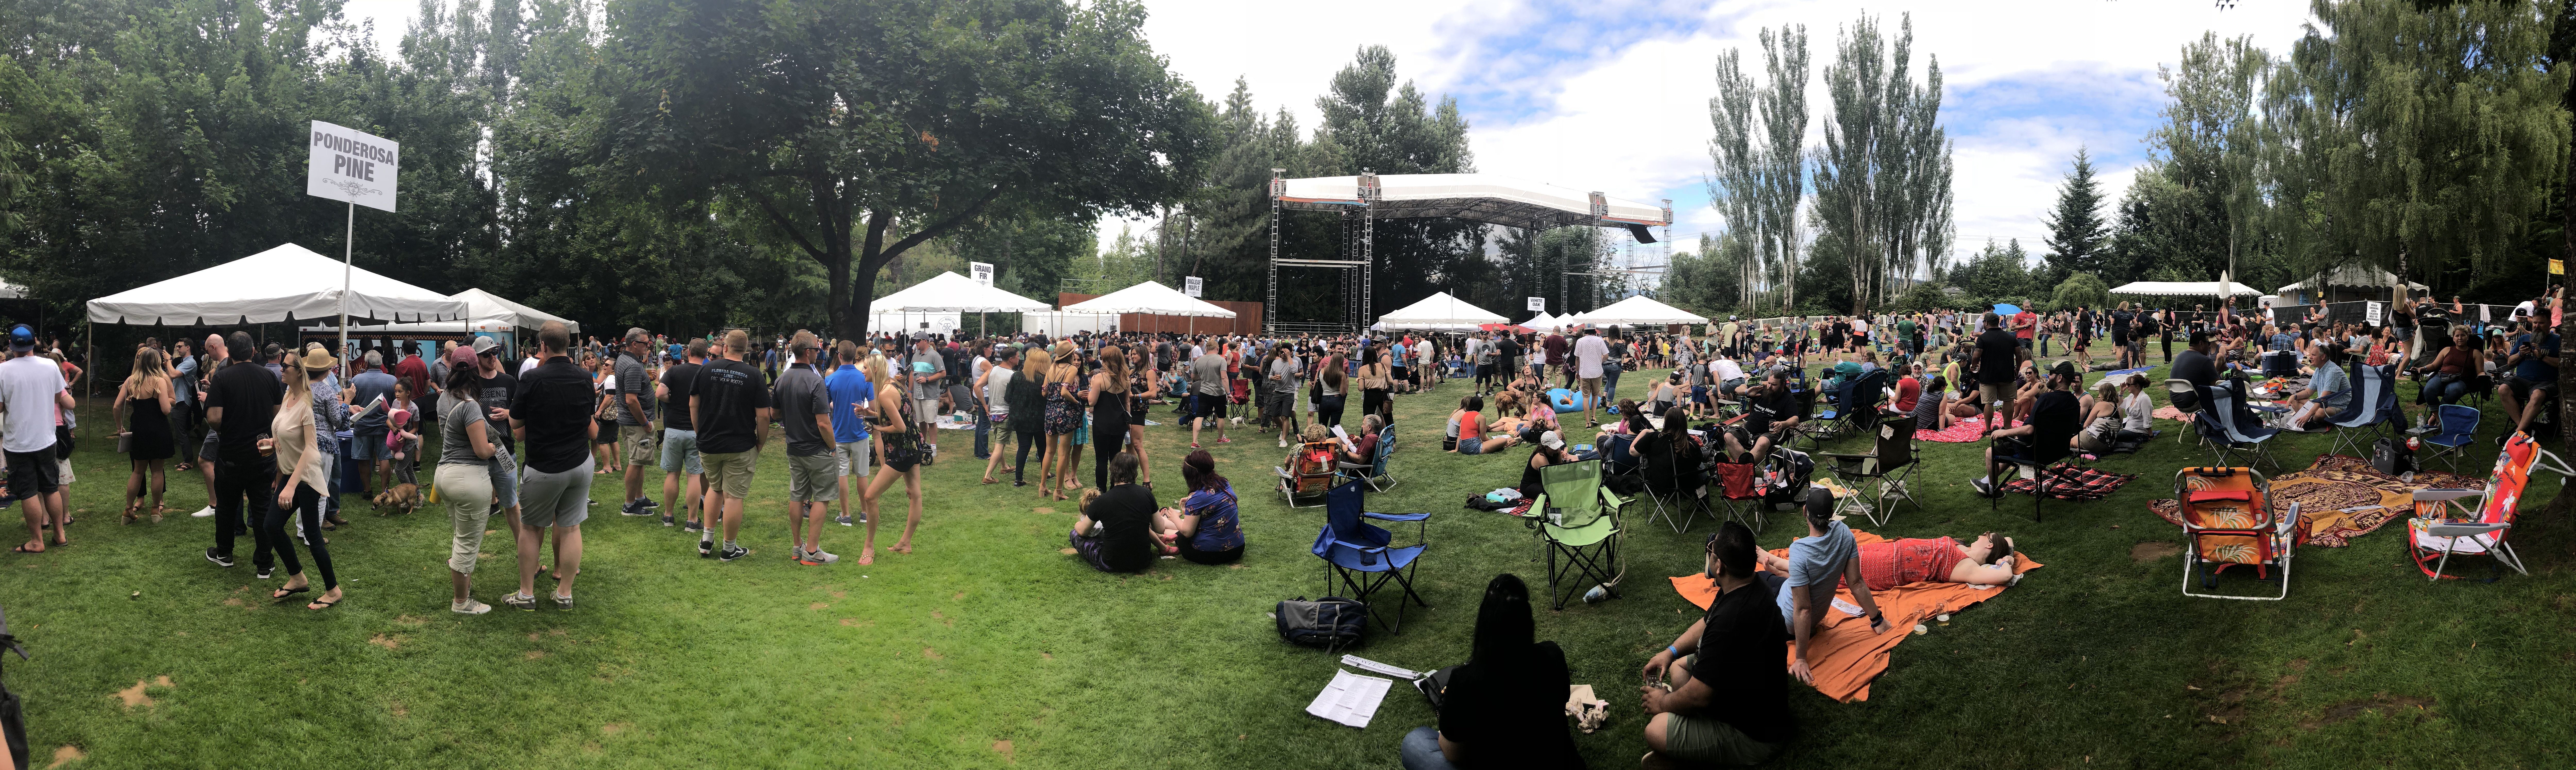 A panoramic view of the McMenamins Edgefield Brewfest.